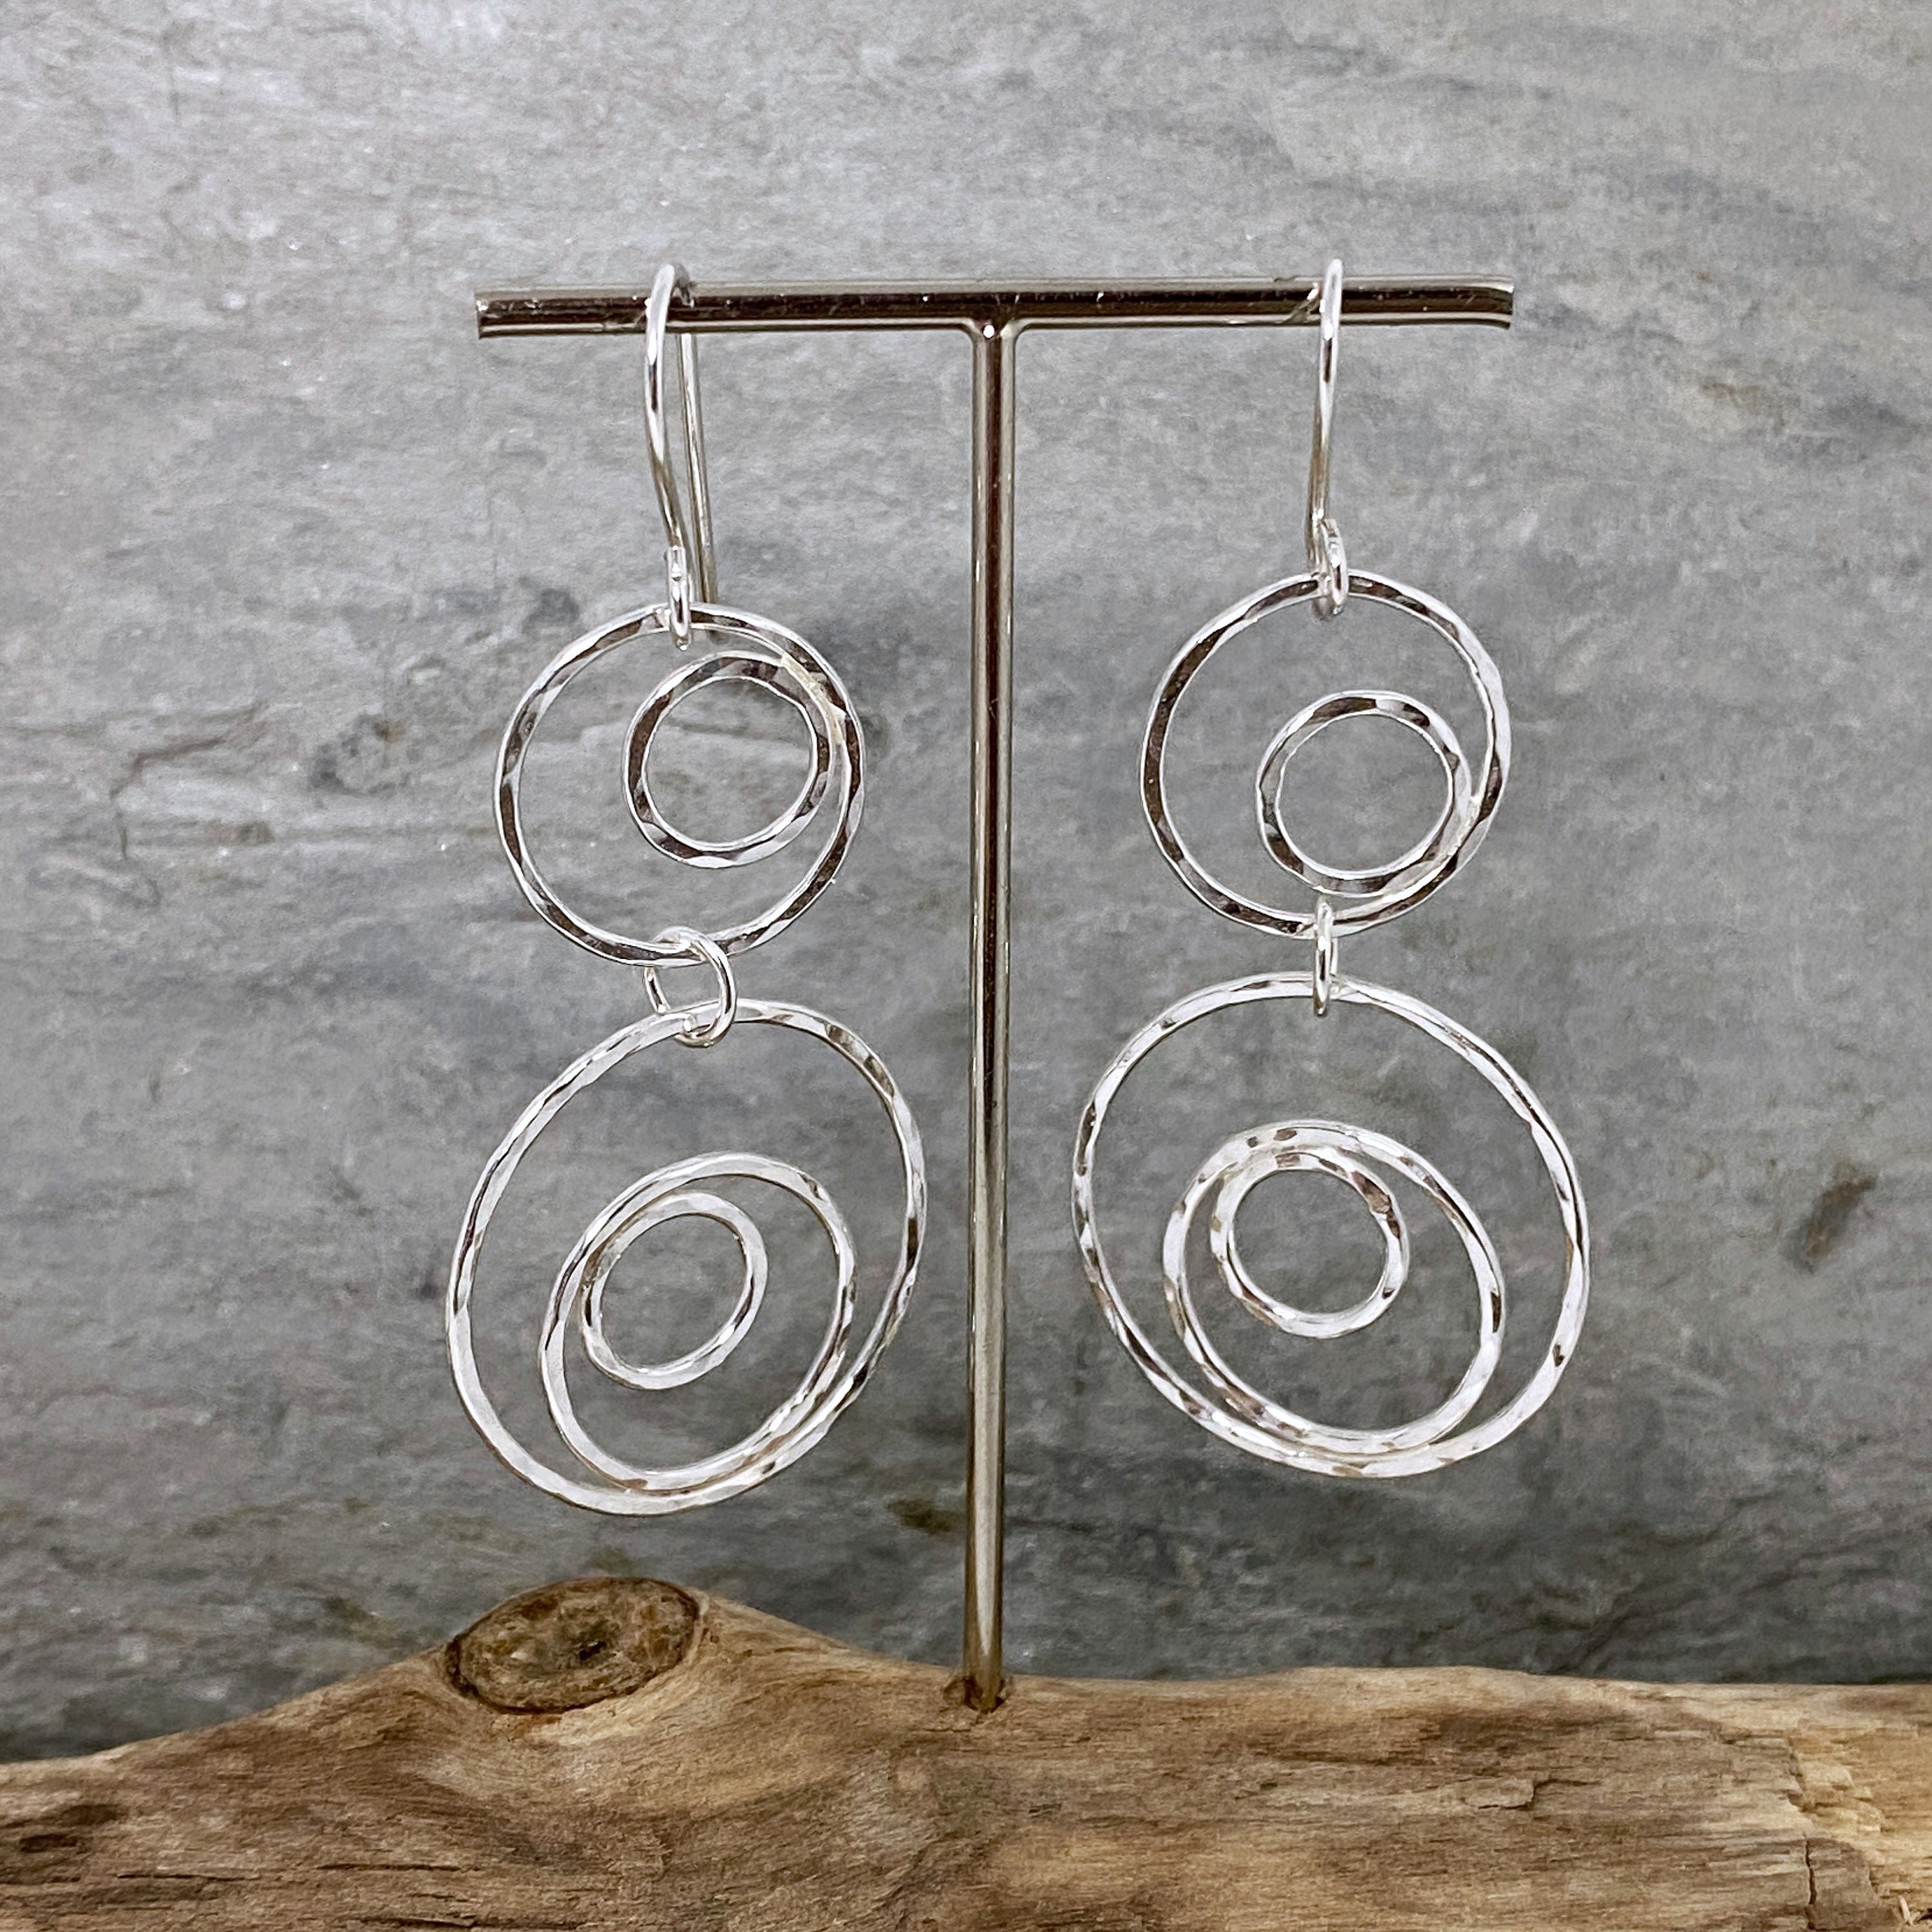 Silver Circles Earrings, Solid Silver Handmade Earrings Made From Hammered Circles, Bold Yet Elegant Jewellery, Unique Jewellery